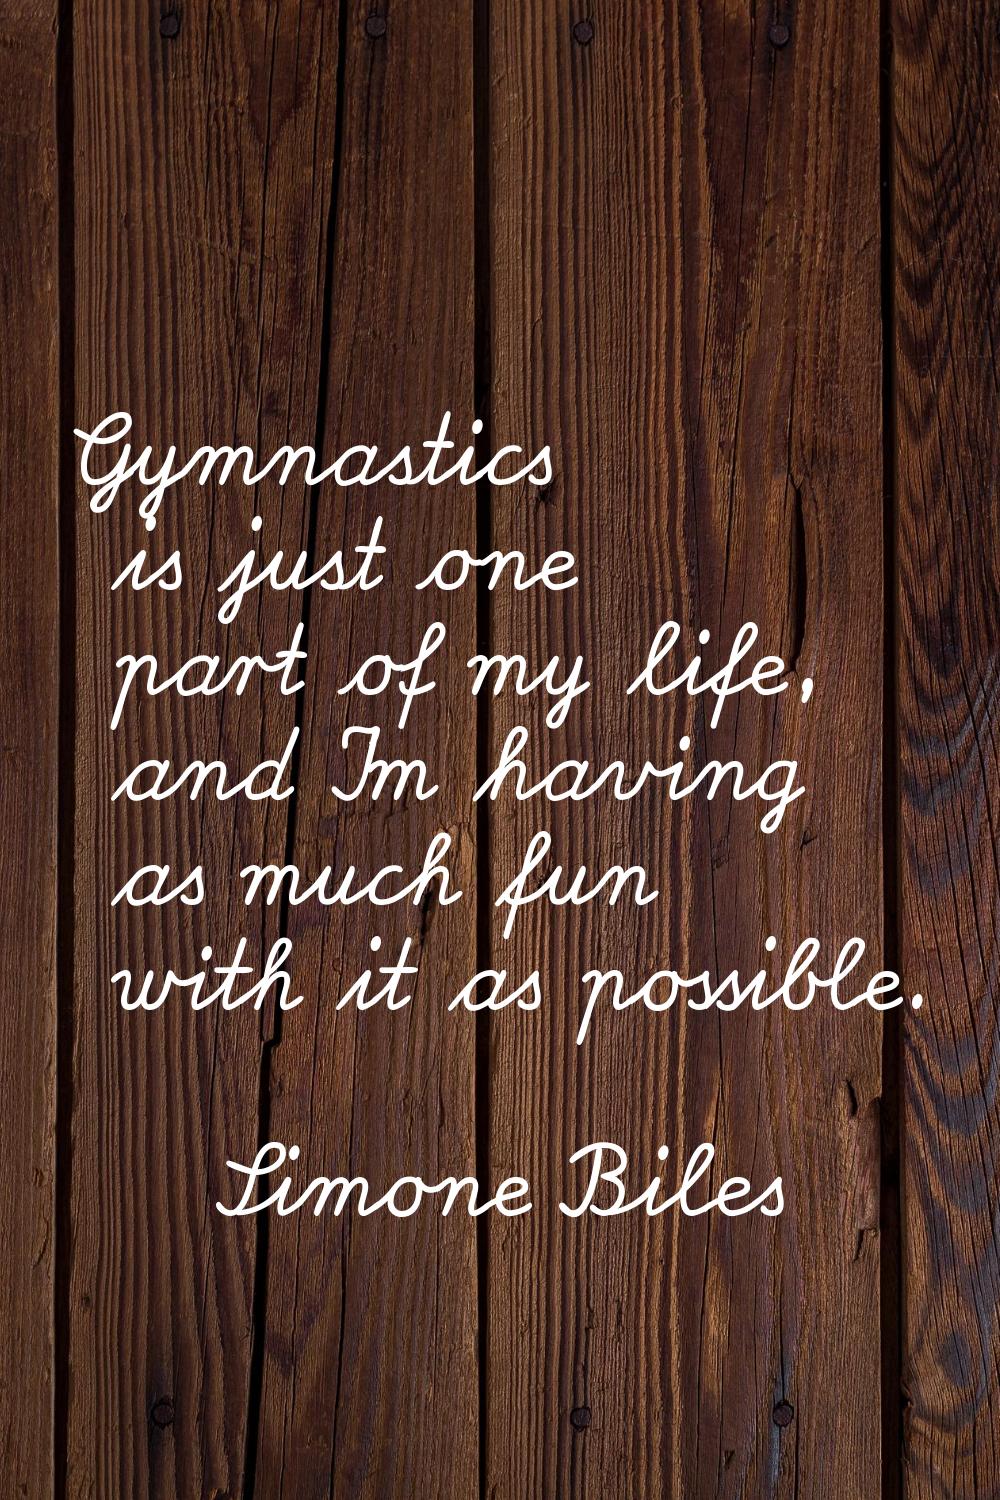 Gymnastics is just one part of my life, and I'm having as much fun with it as possible.